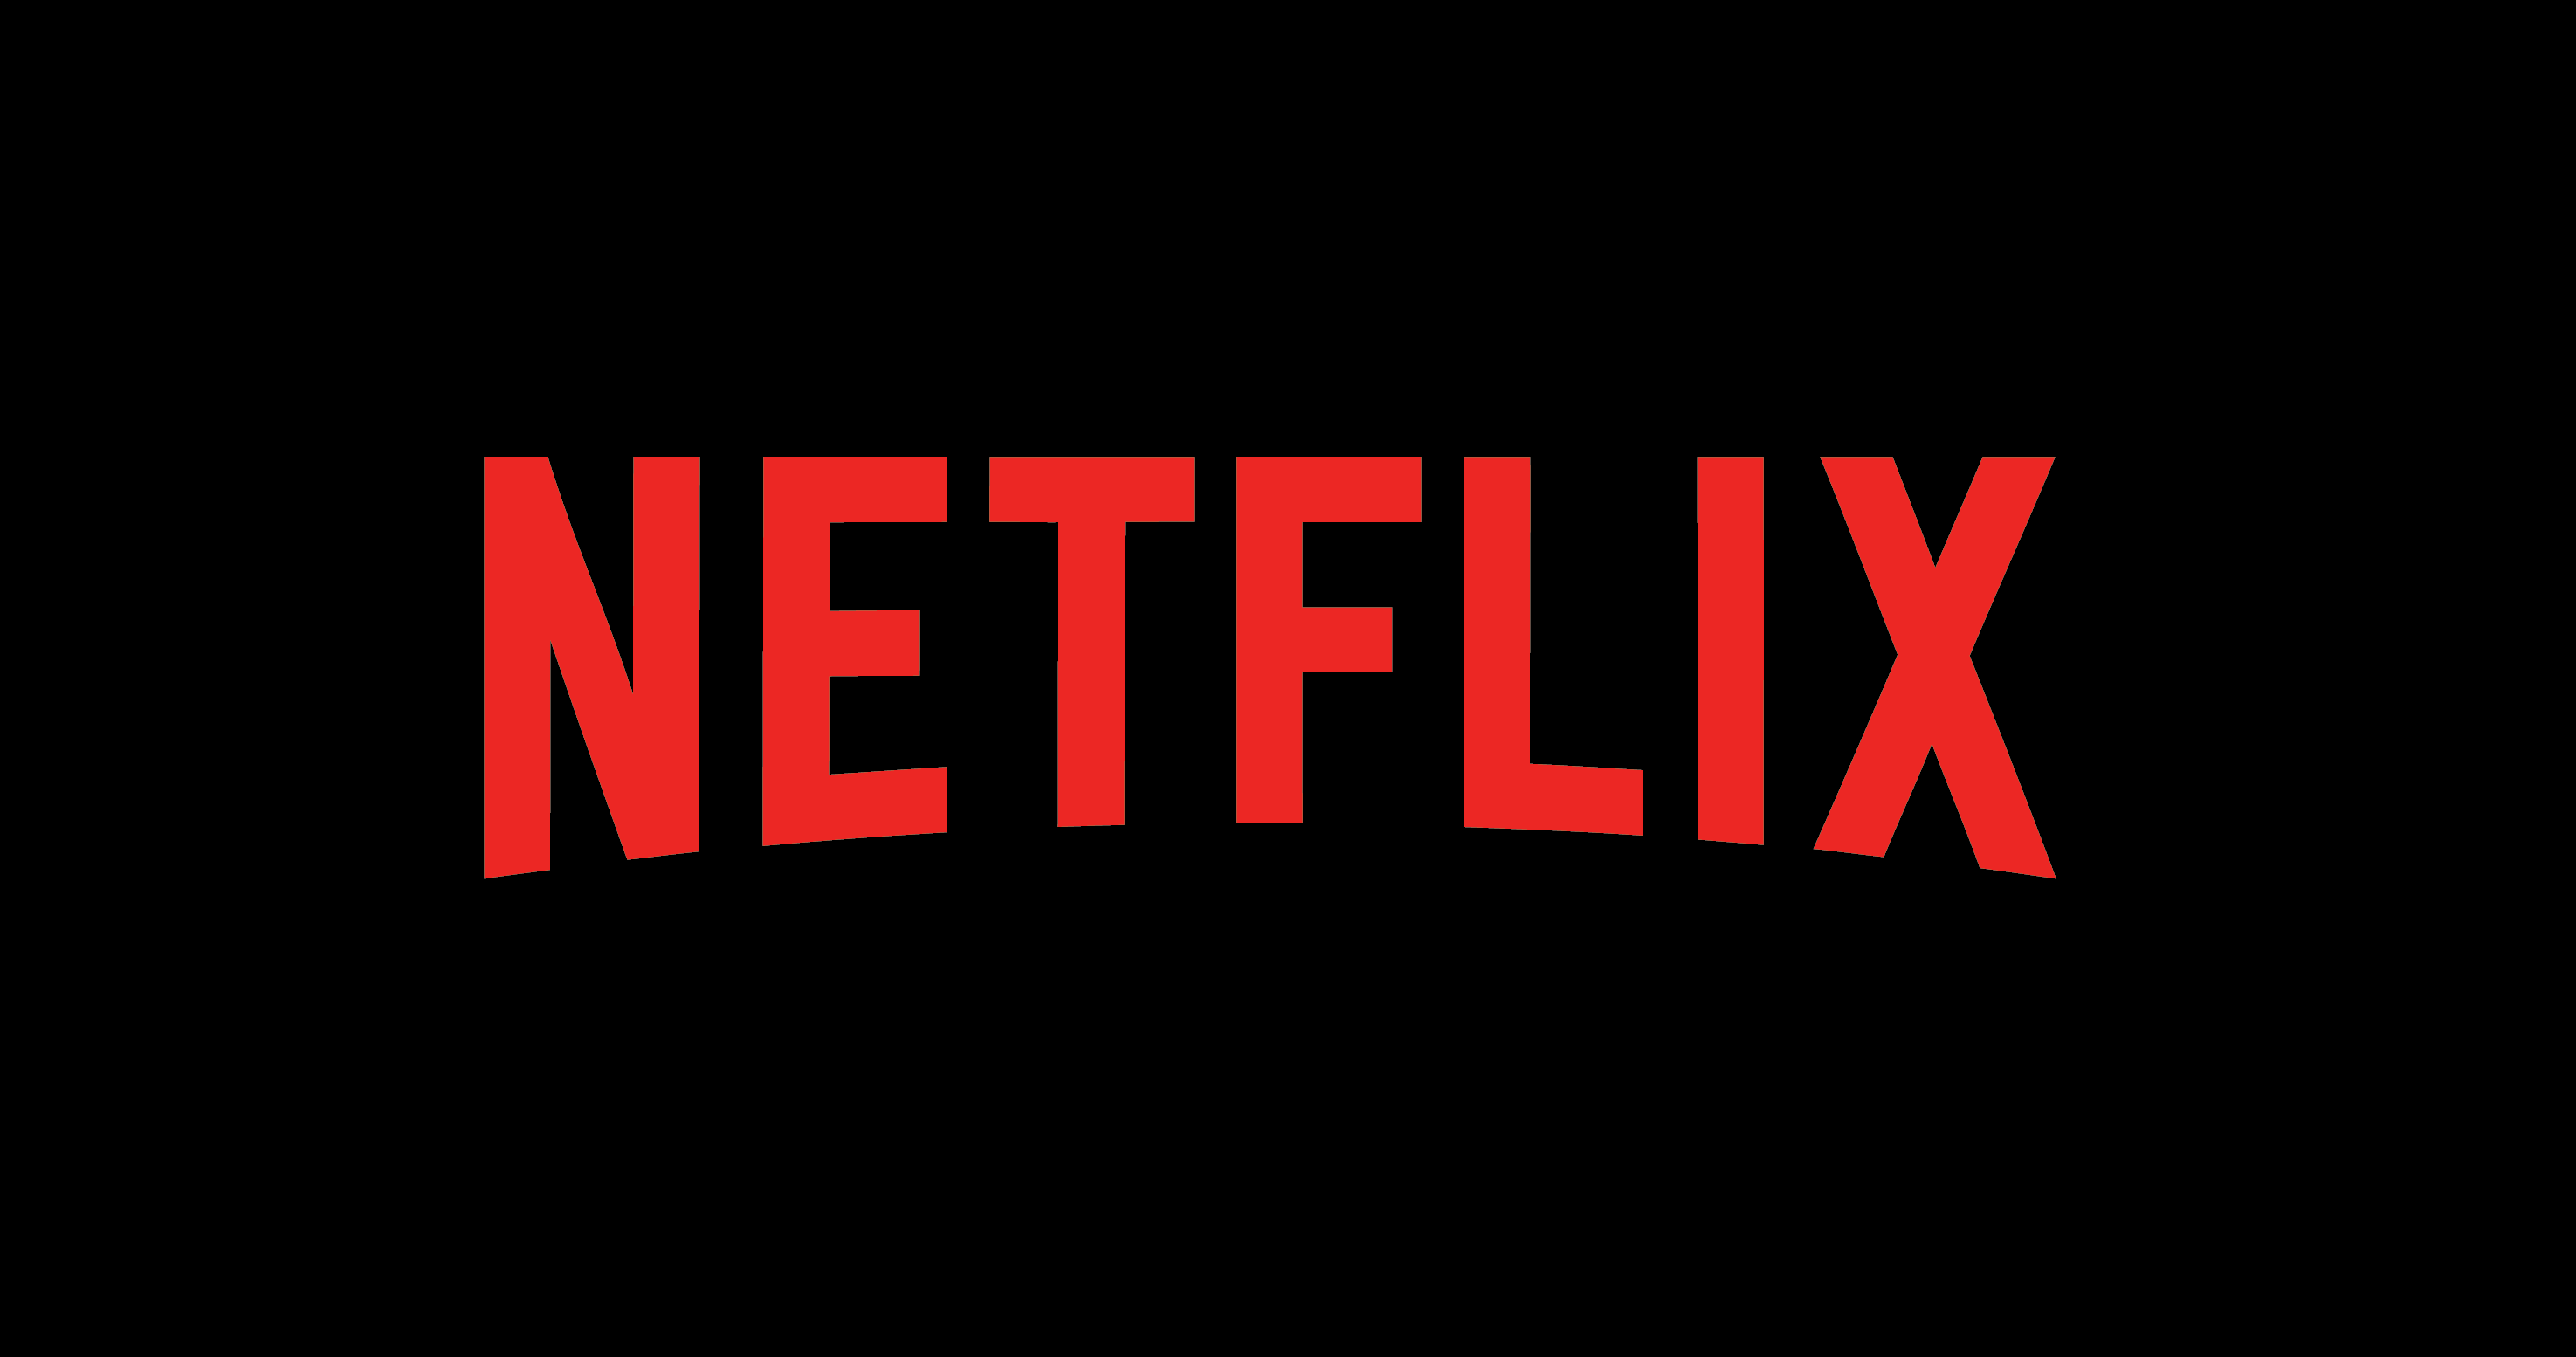 Netflix Could Lose Millions of Subscribers to Disney+ According to a Recent Survey